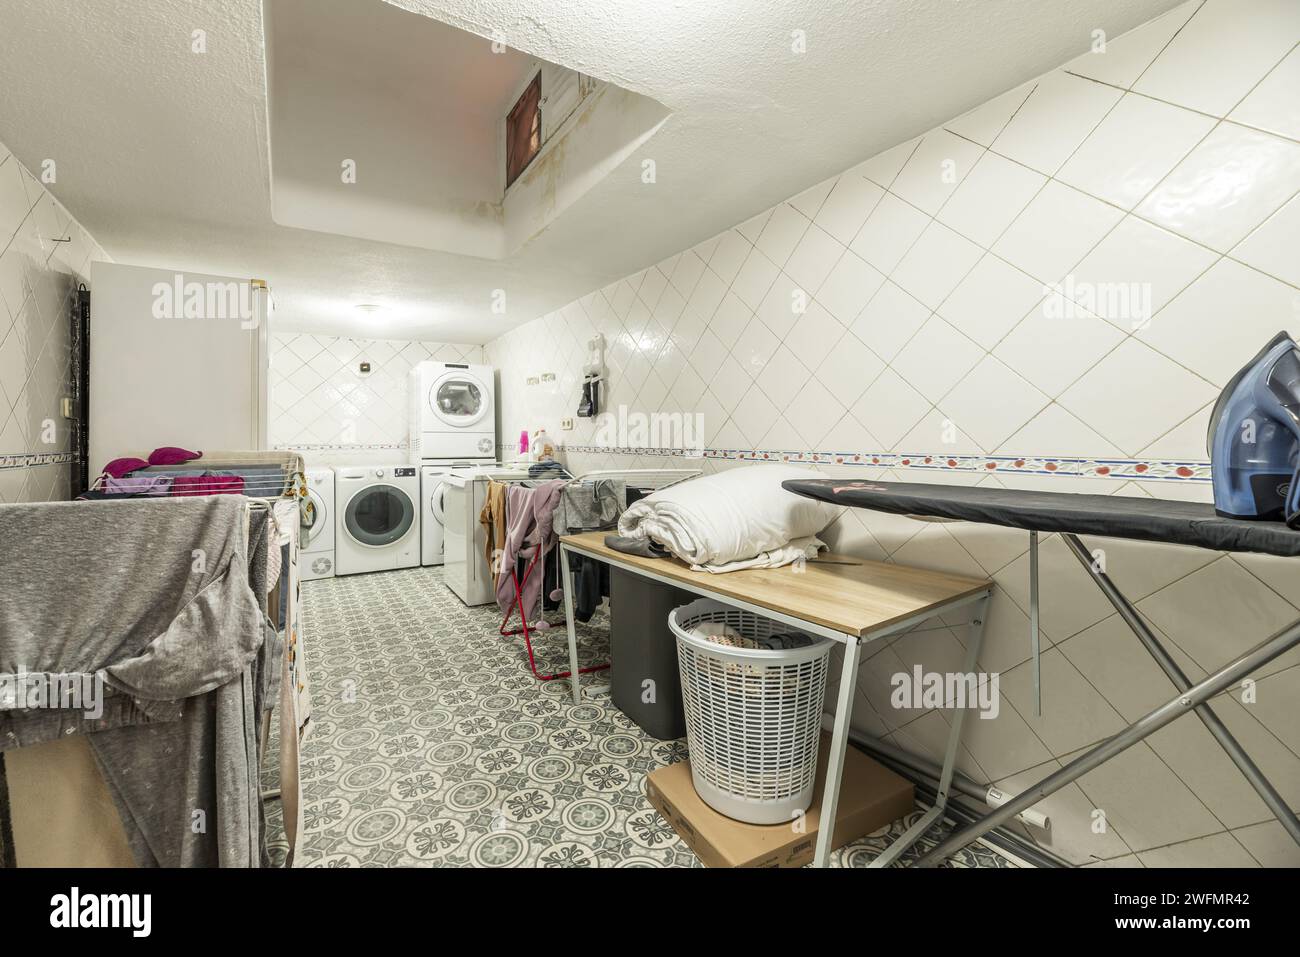 A room dedicated to laundry on the ground floor of a house full of clotheslines full of clothes, washing machines, dryers and ironing utensils Stock Photo